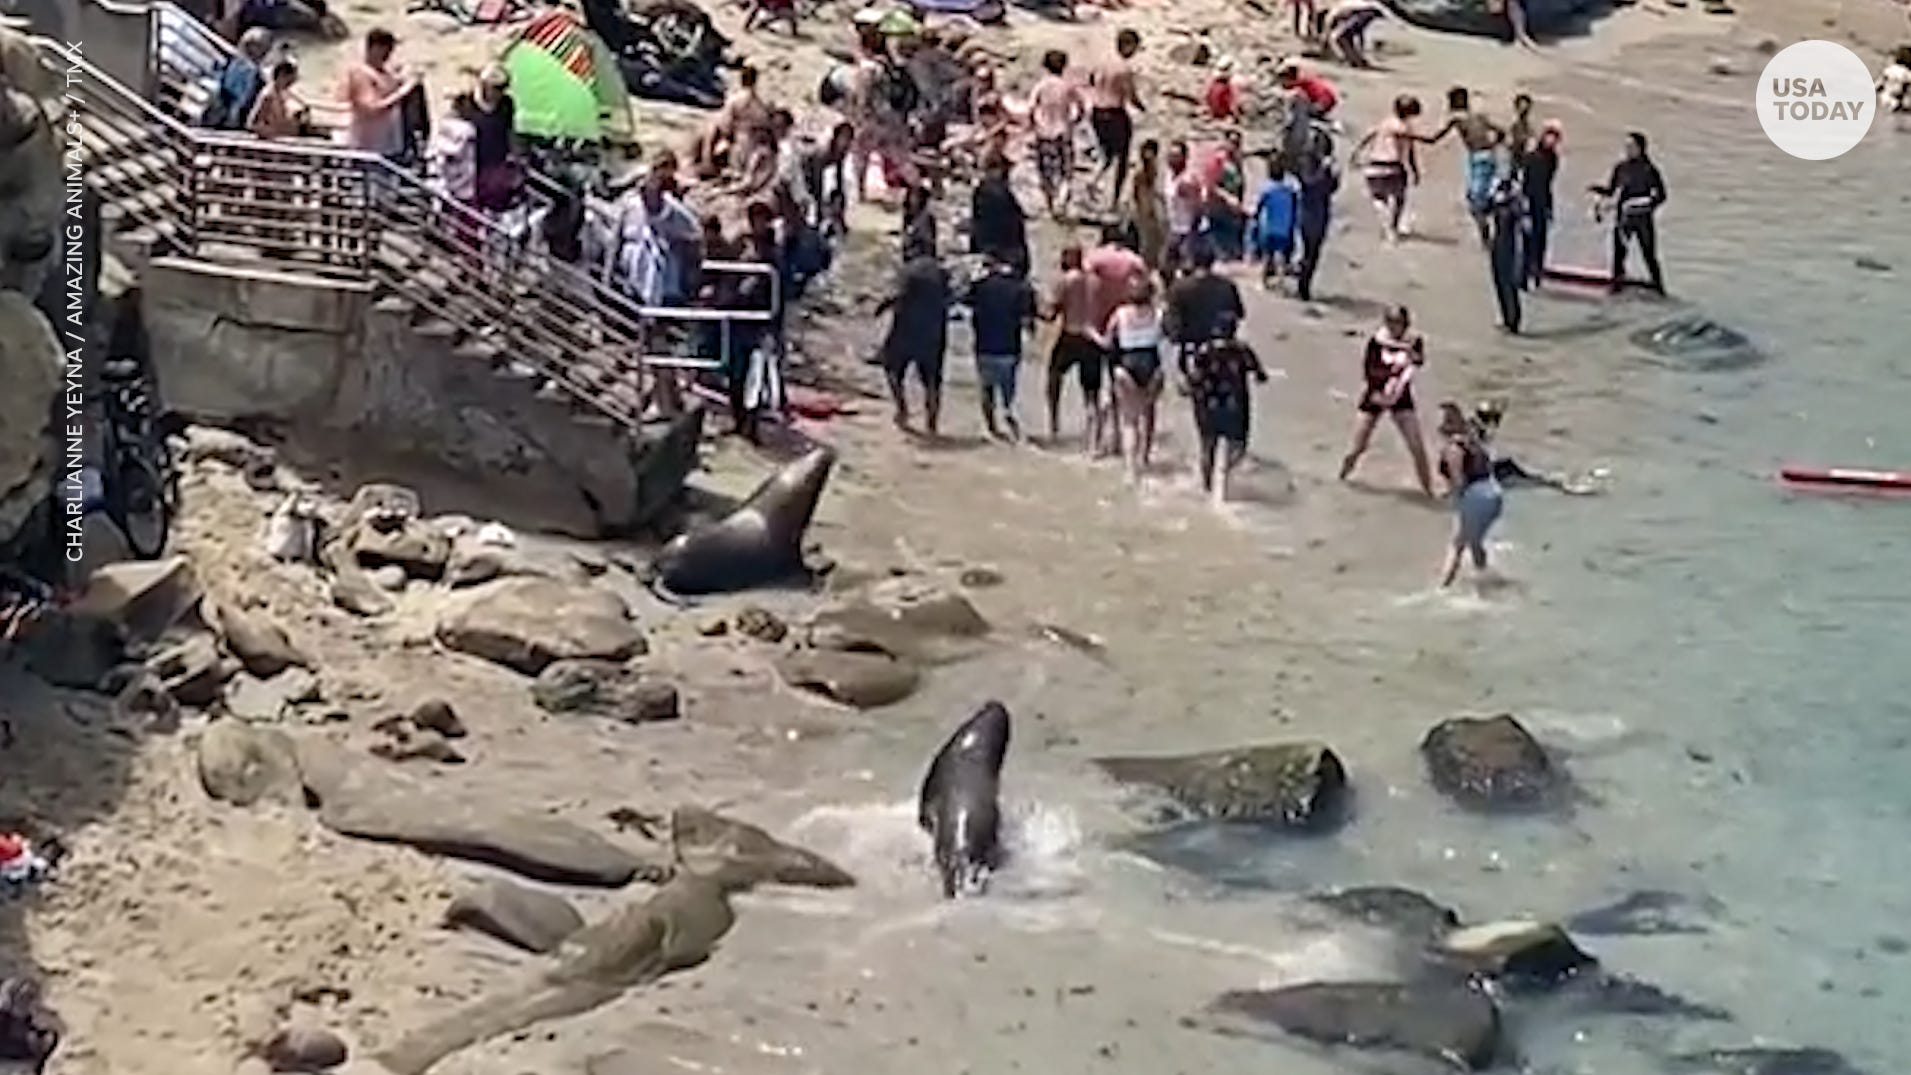 Sea lions in viral video were sparring for mates, not chasing